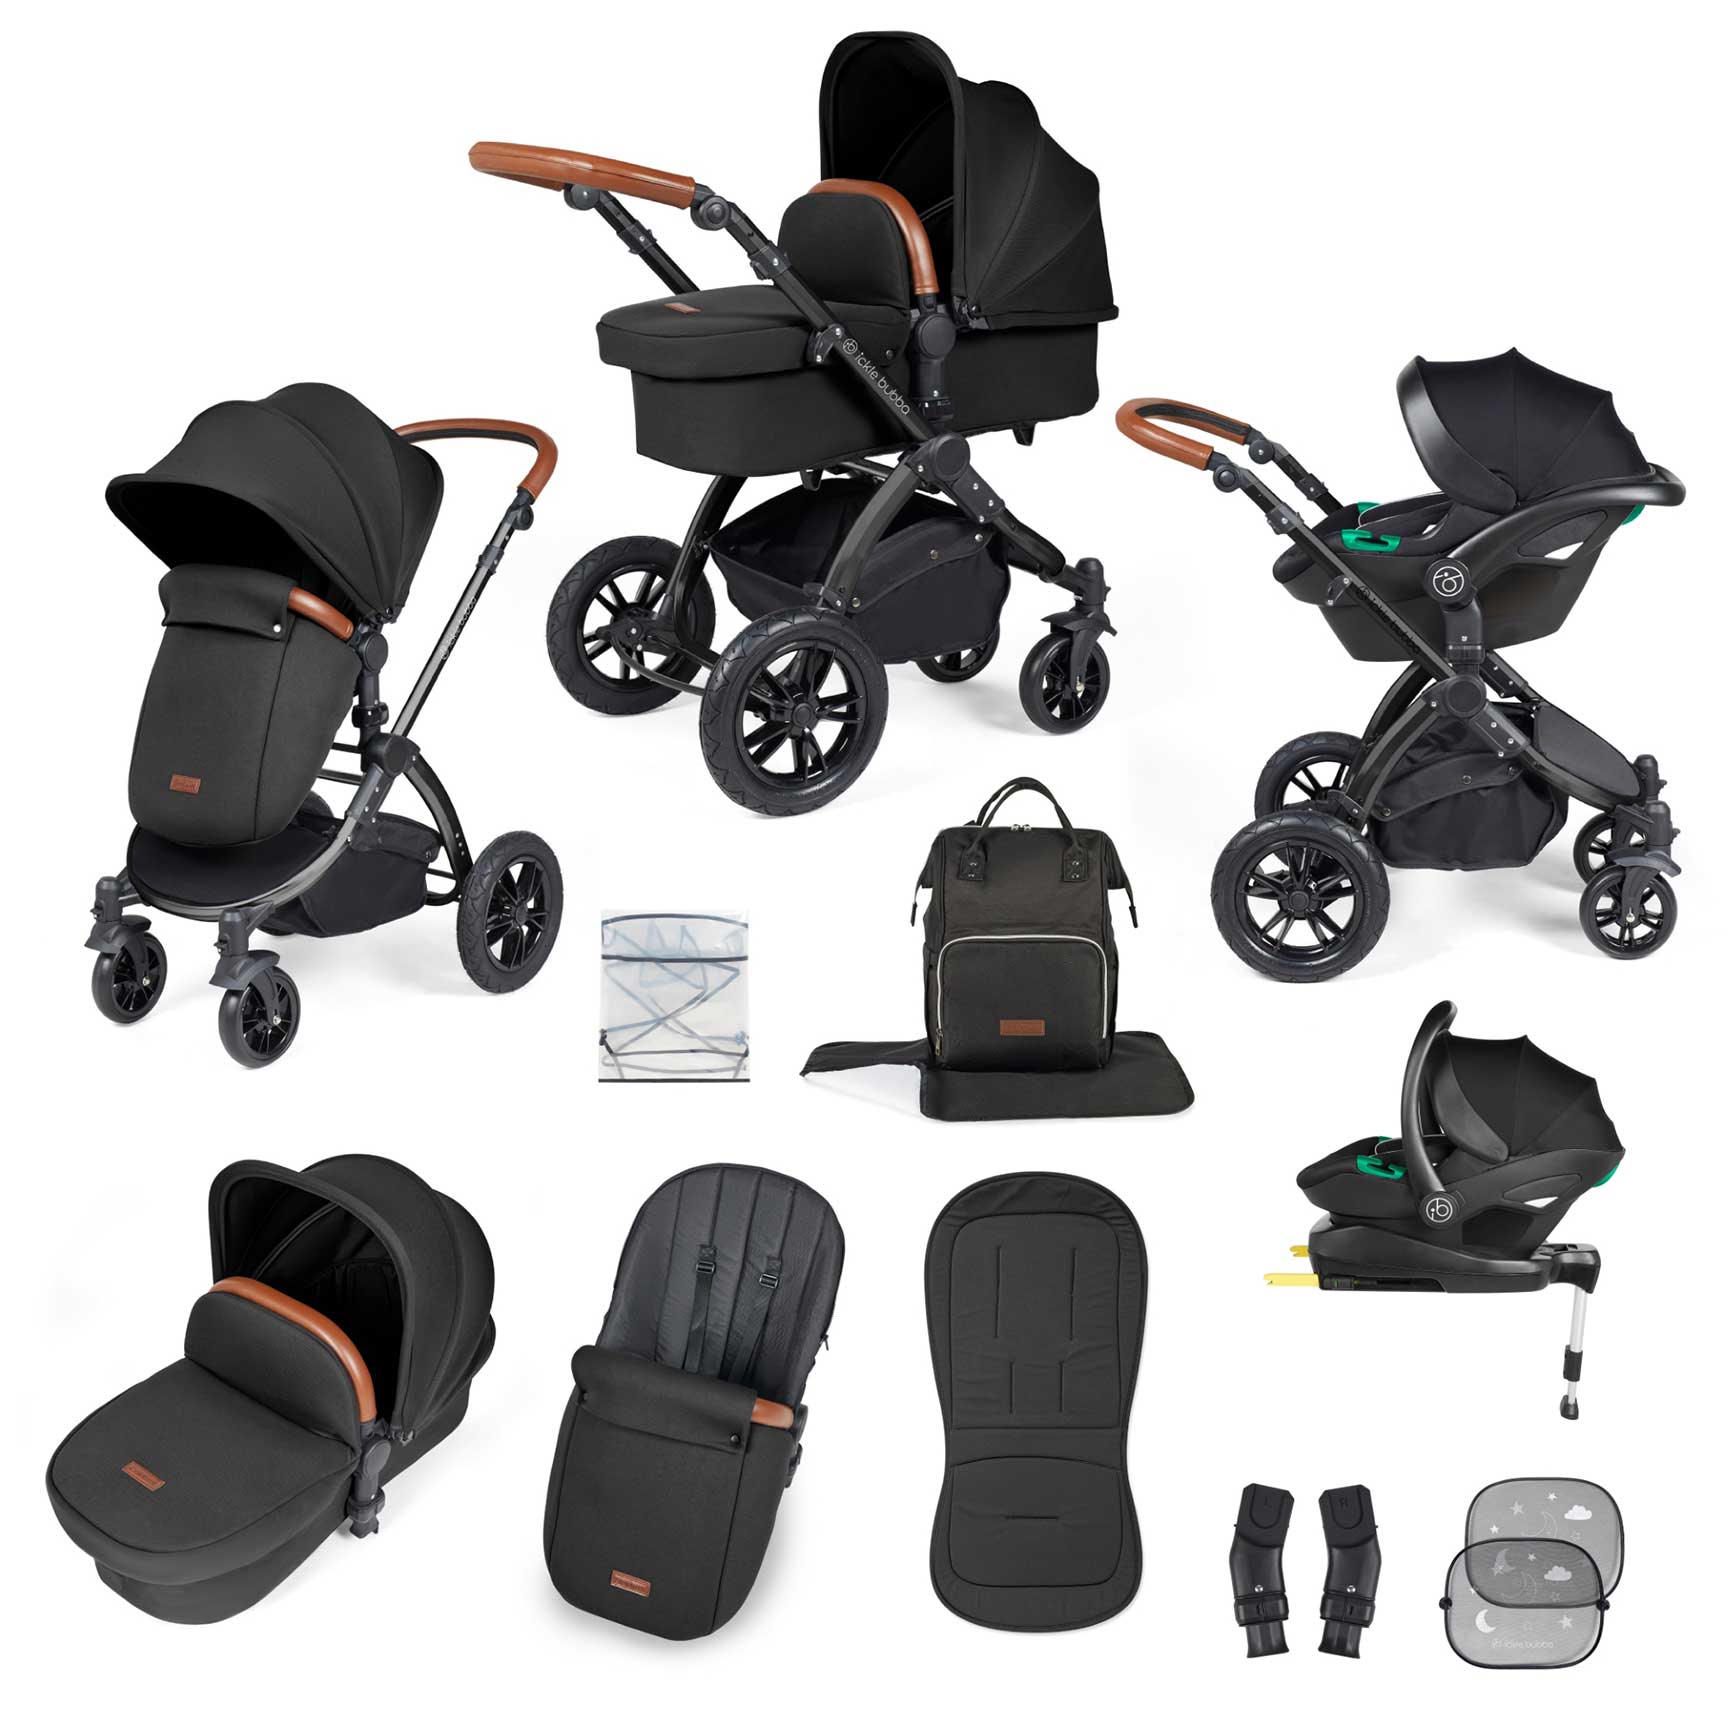 Ickle Bubba Stomp Luxe All-in-One Travel System with Isofix Base in Black/Midnight/Tan Travel Systems 10-011-300-203 5056515026429